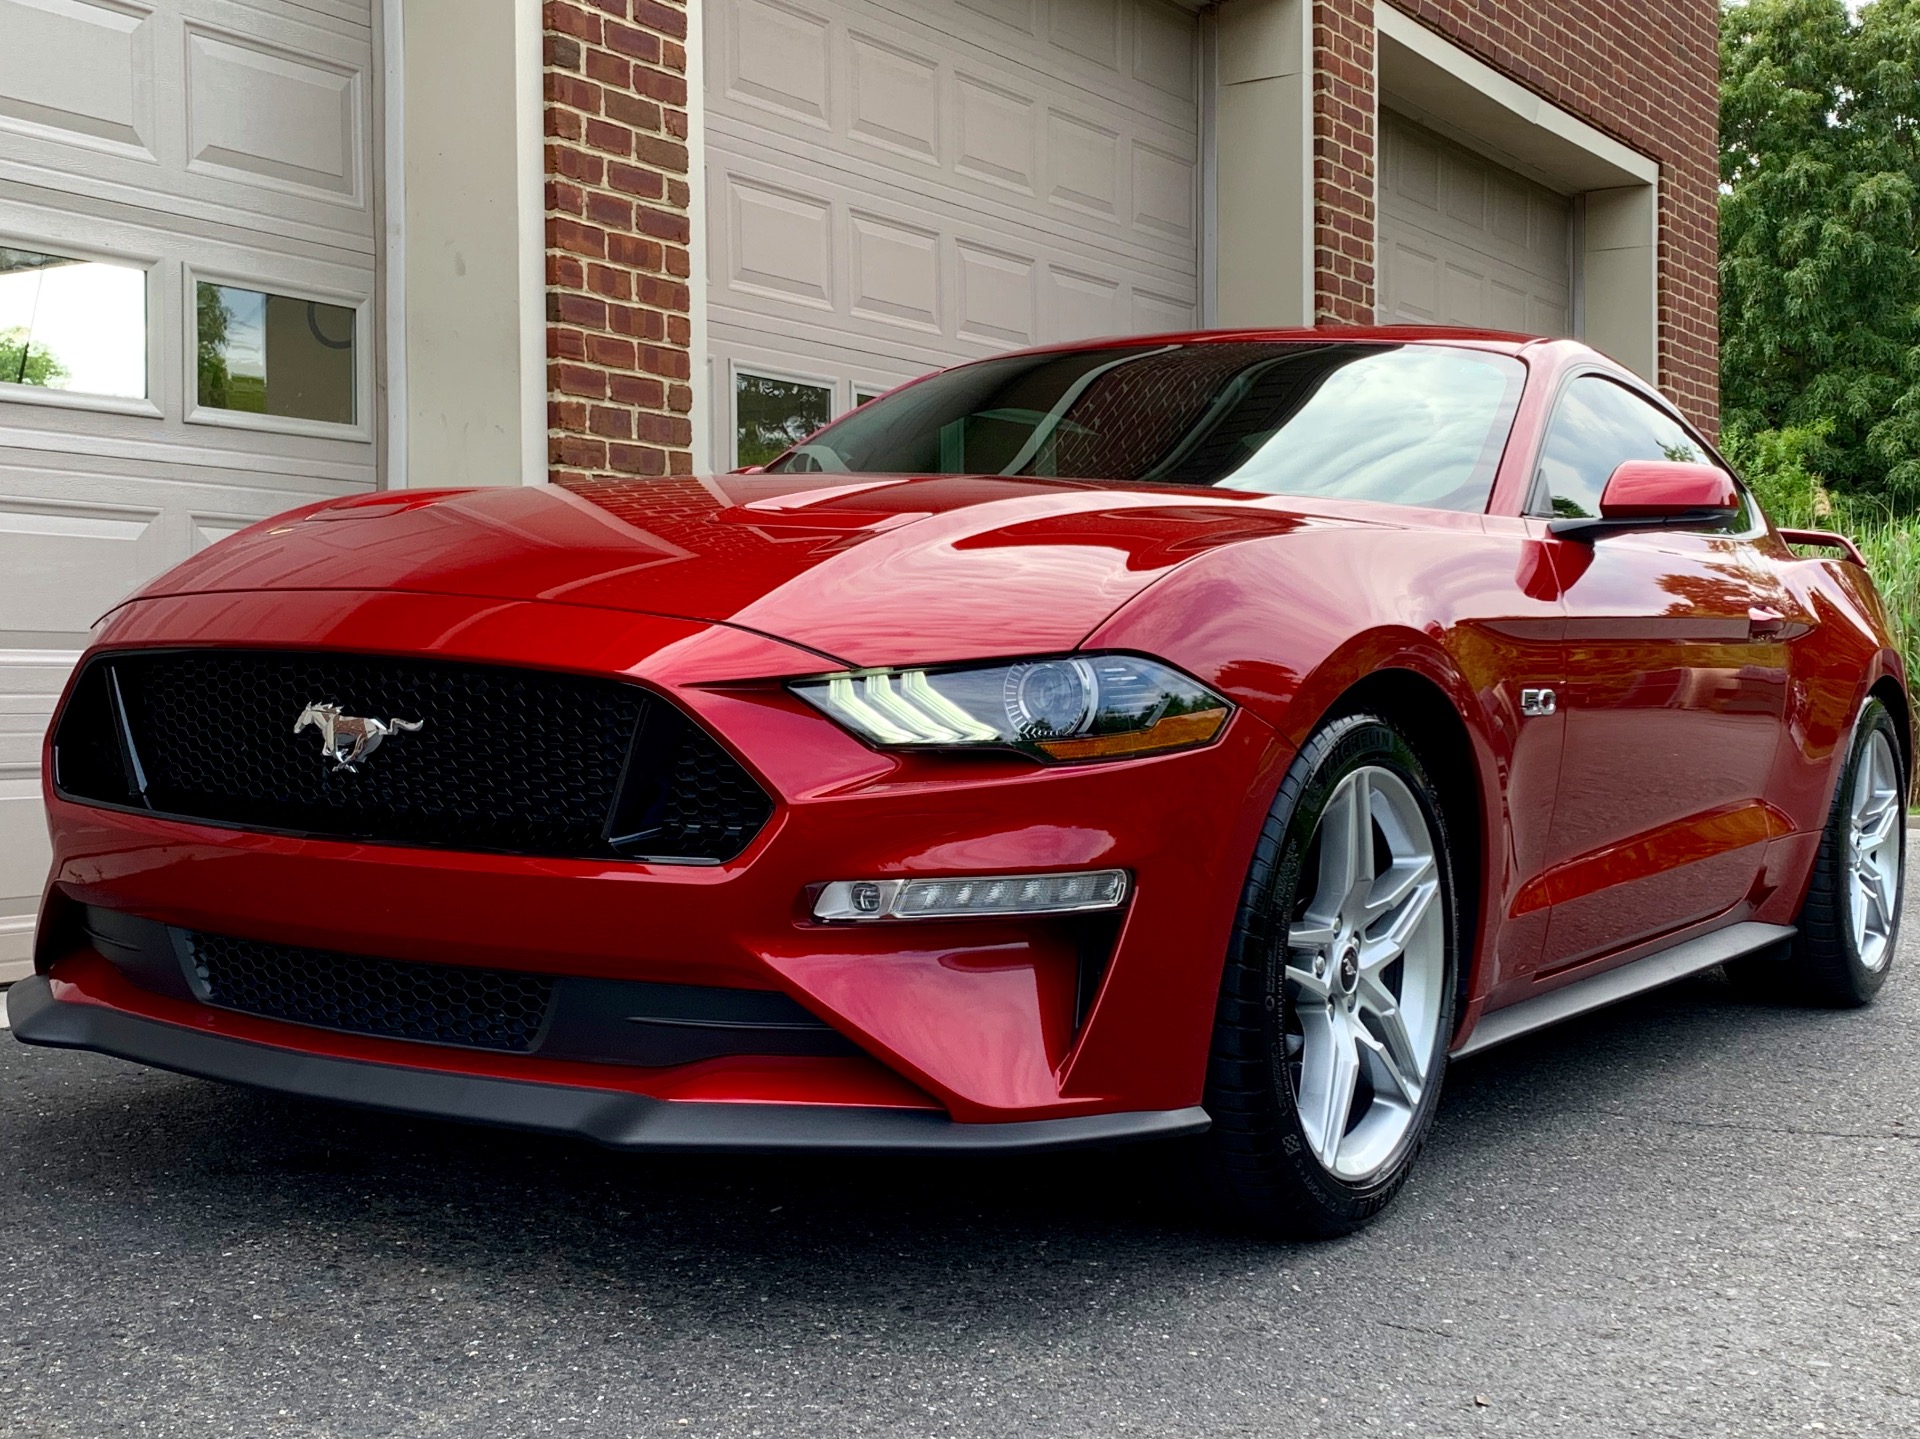 2020 Ford Mustang GT Premium Stock 153603 for sale near Edgewater